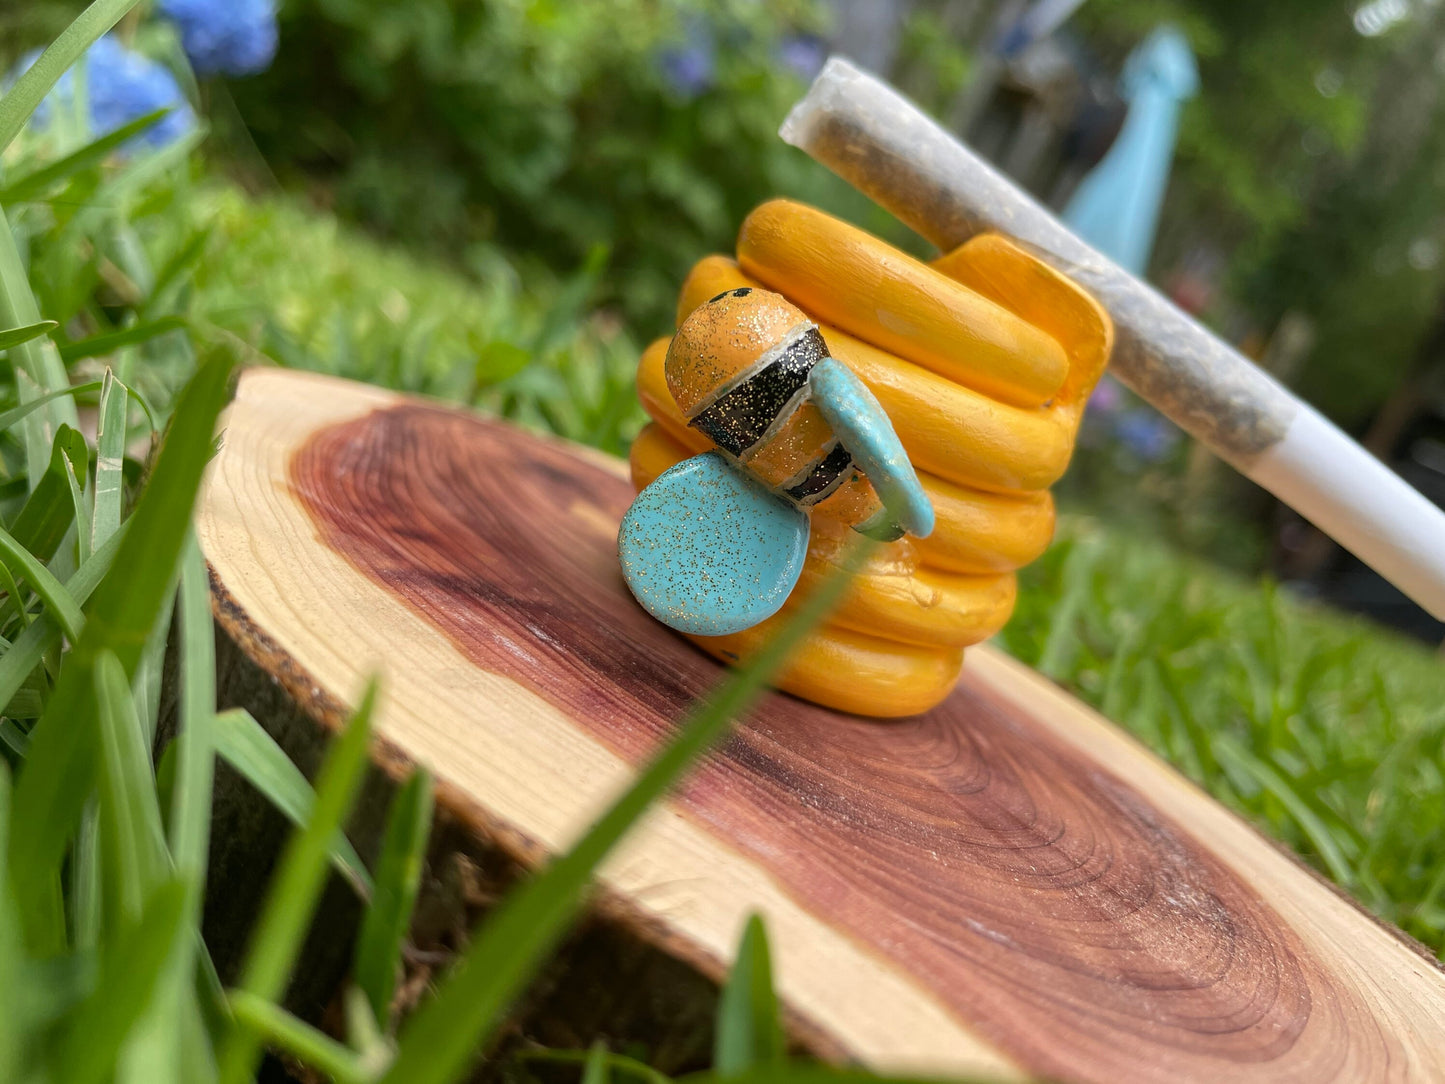 Polymer Clay Ashtray - Honey Bee Hive Ashtray - Gifts for Bee Lovers - Bee Plant Holder